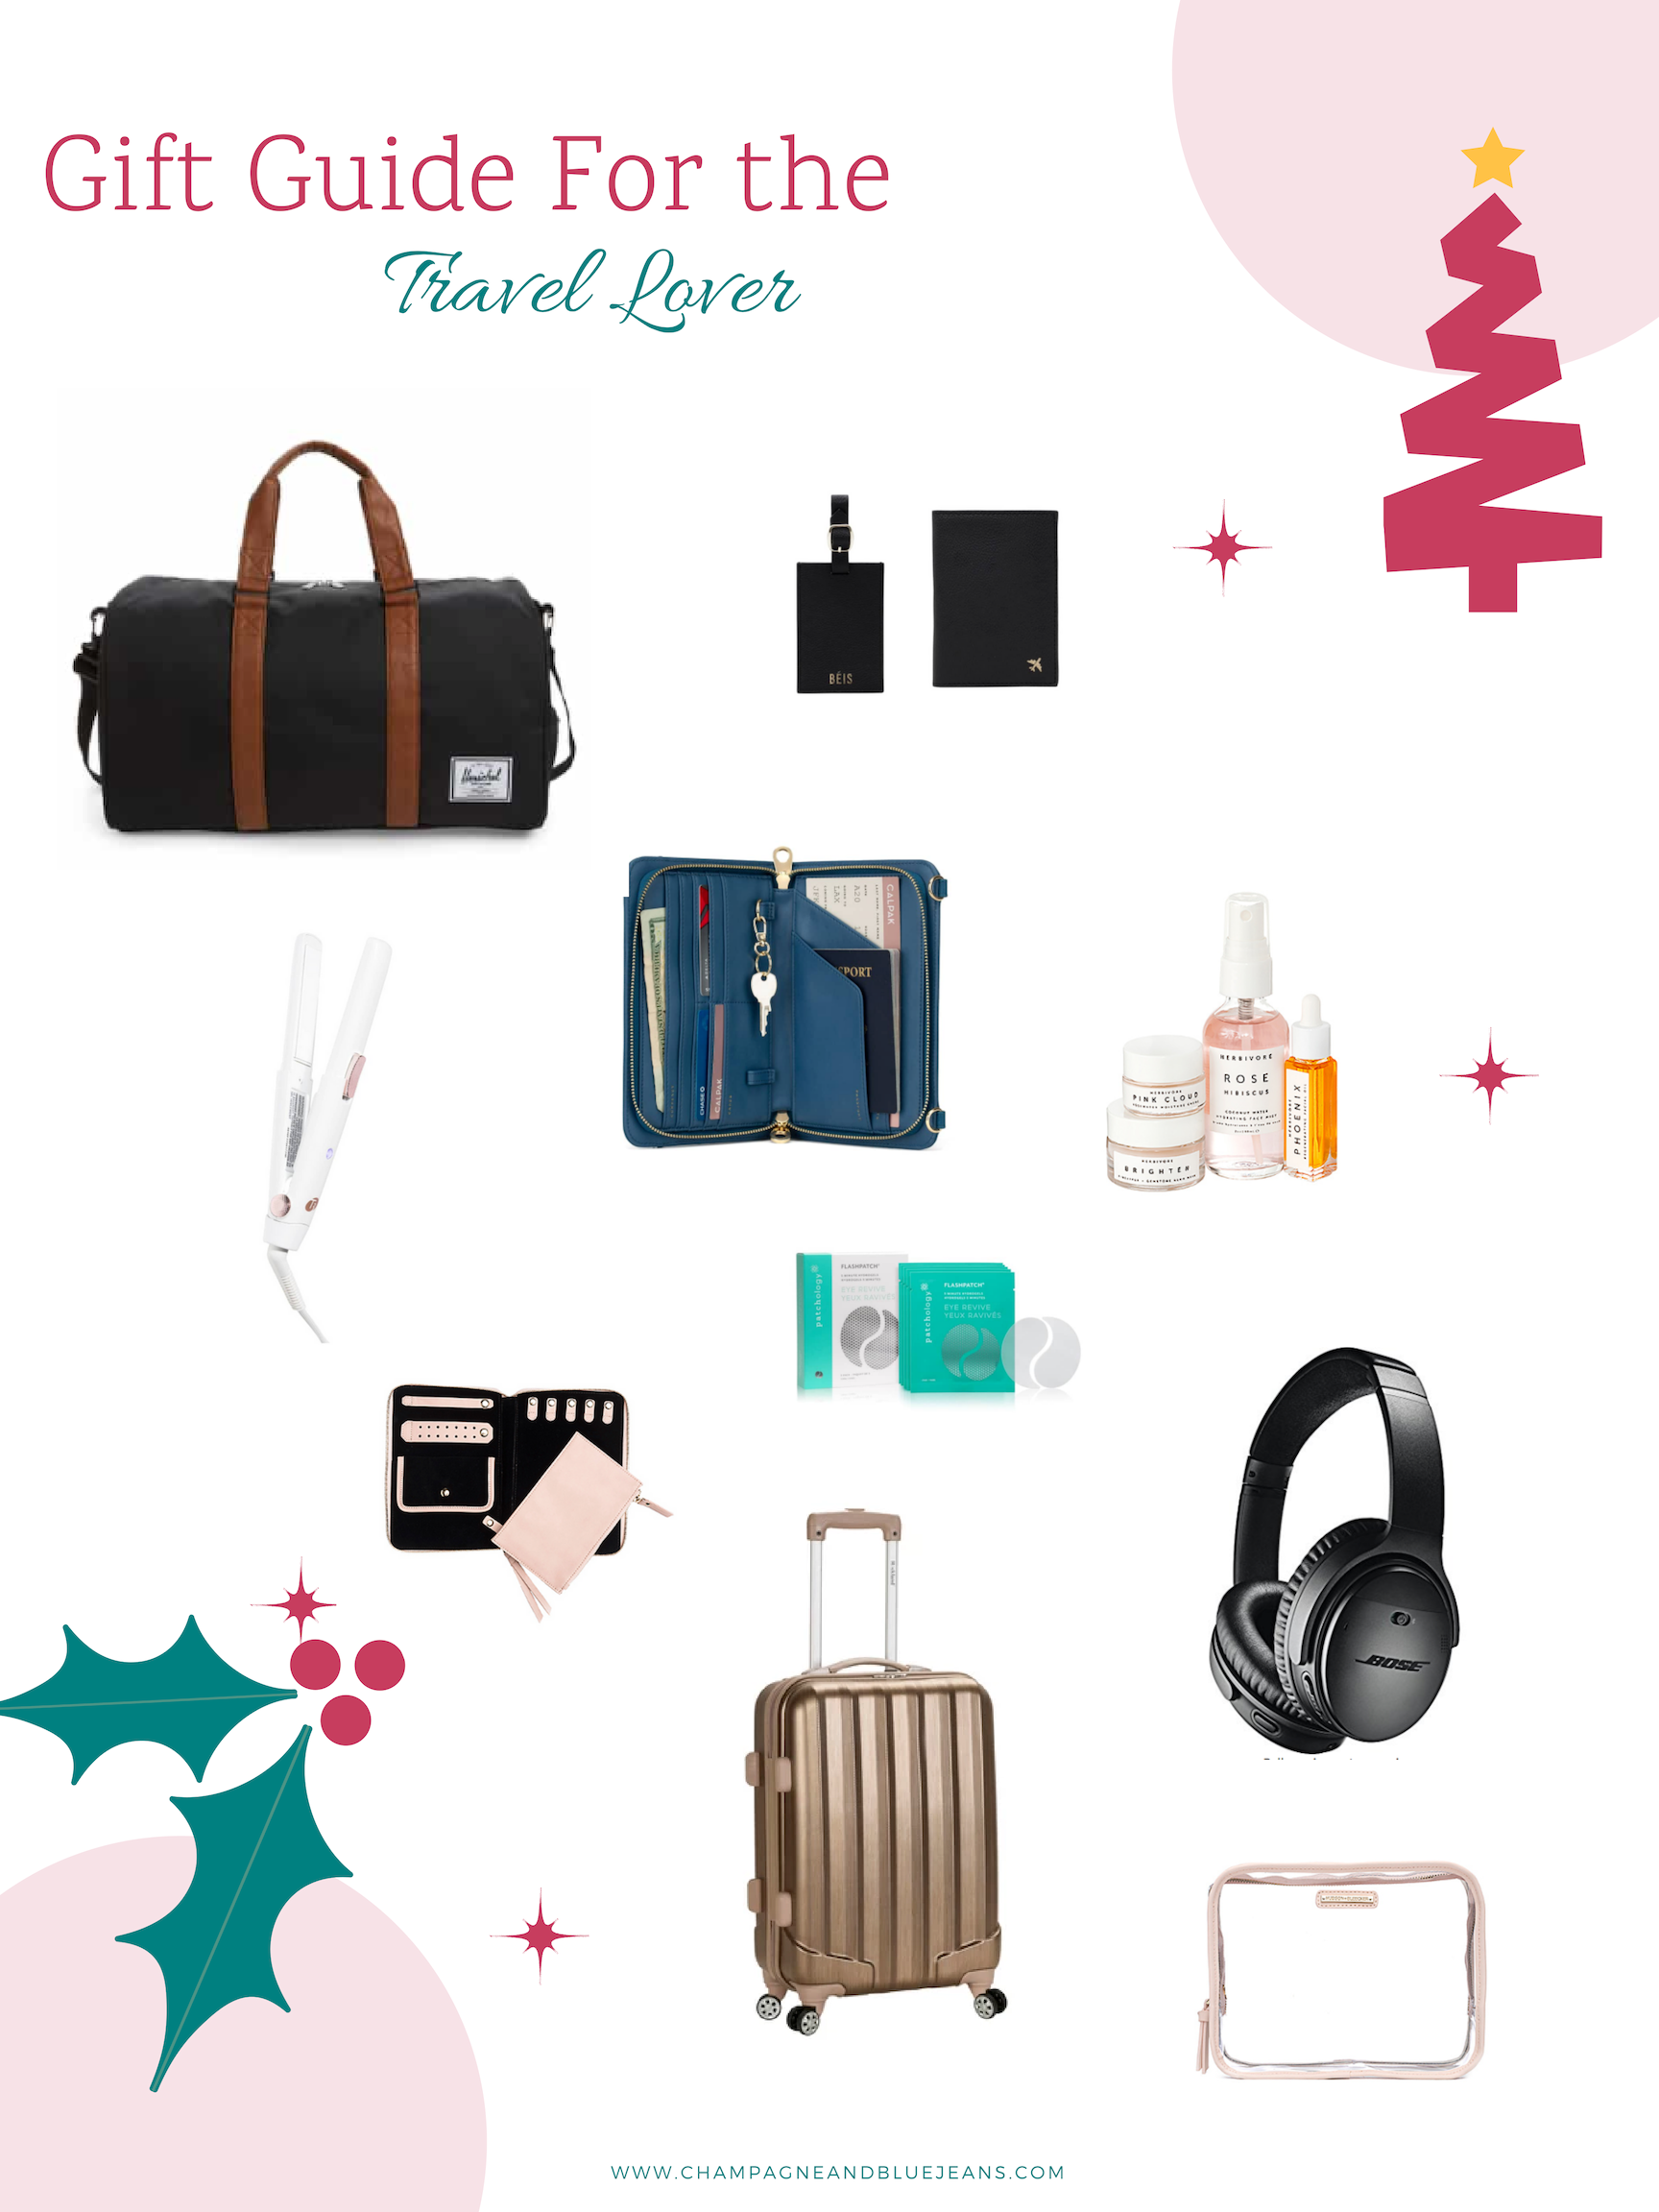 Christmas Gift Guide for Travelers by Champagne and Blue Jeans